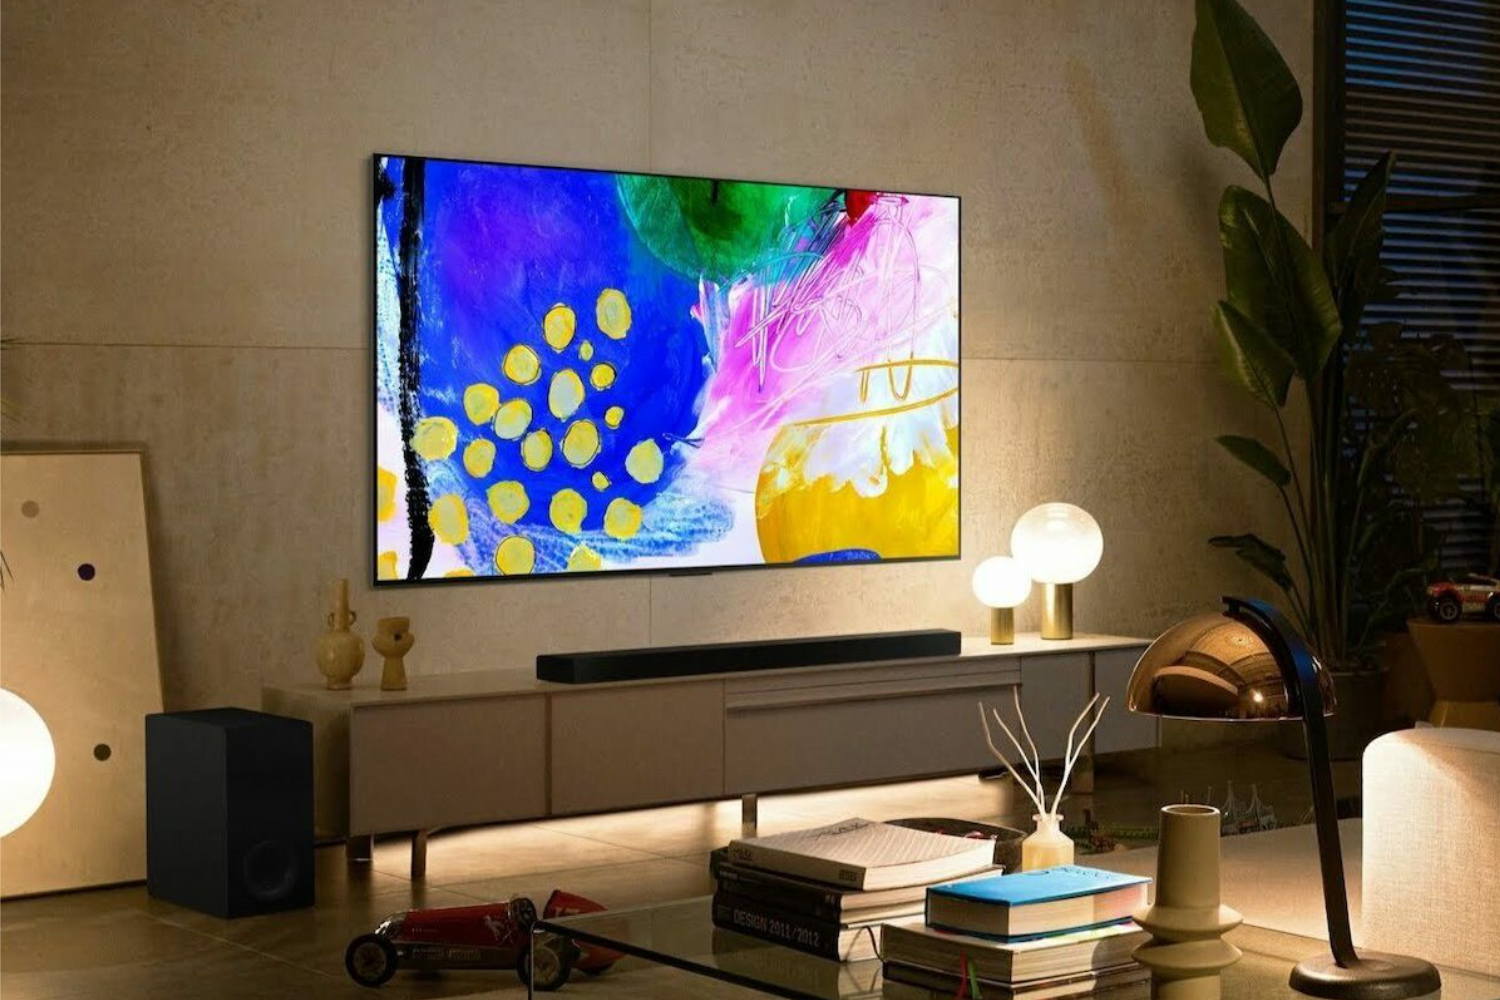 LG G2 OLED TV Review: The best looking LG OLED yet - Reviewed